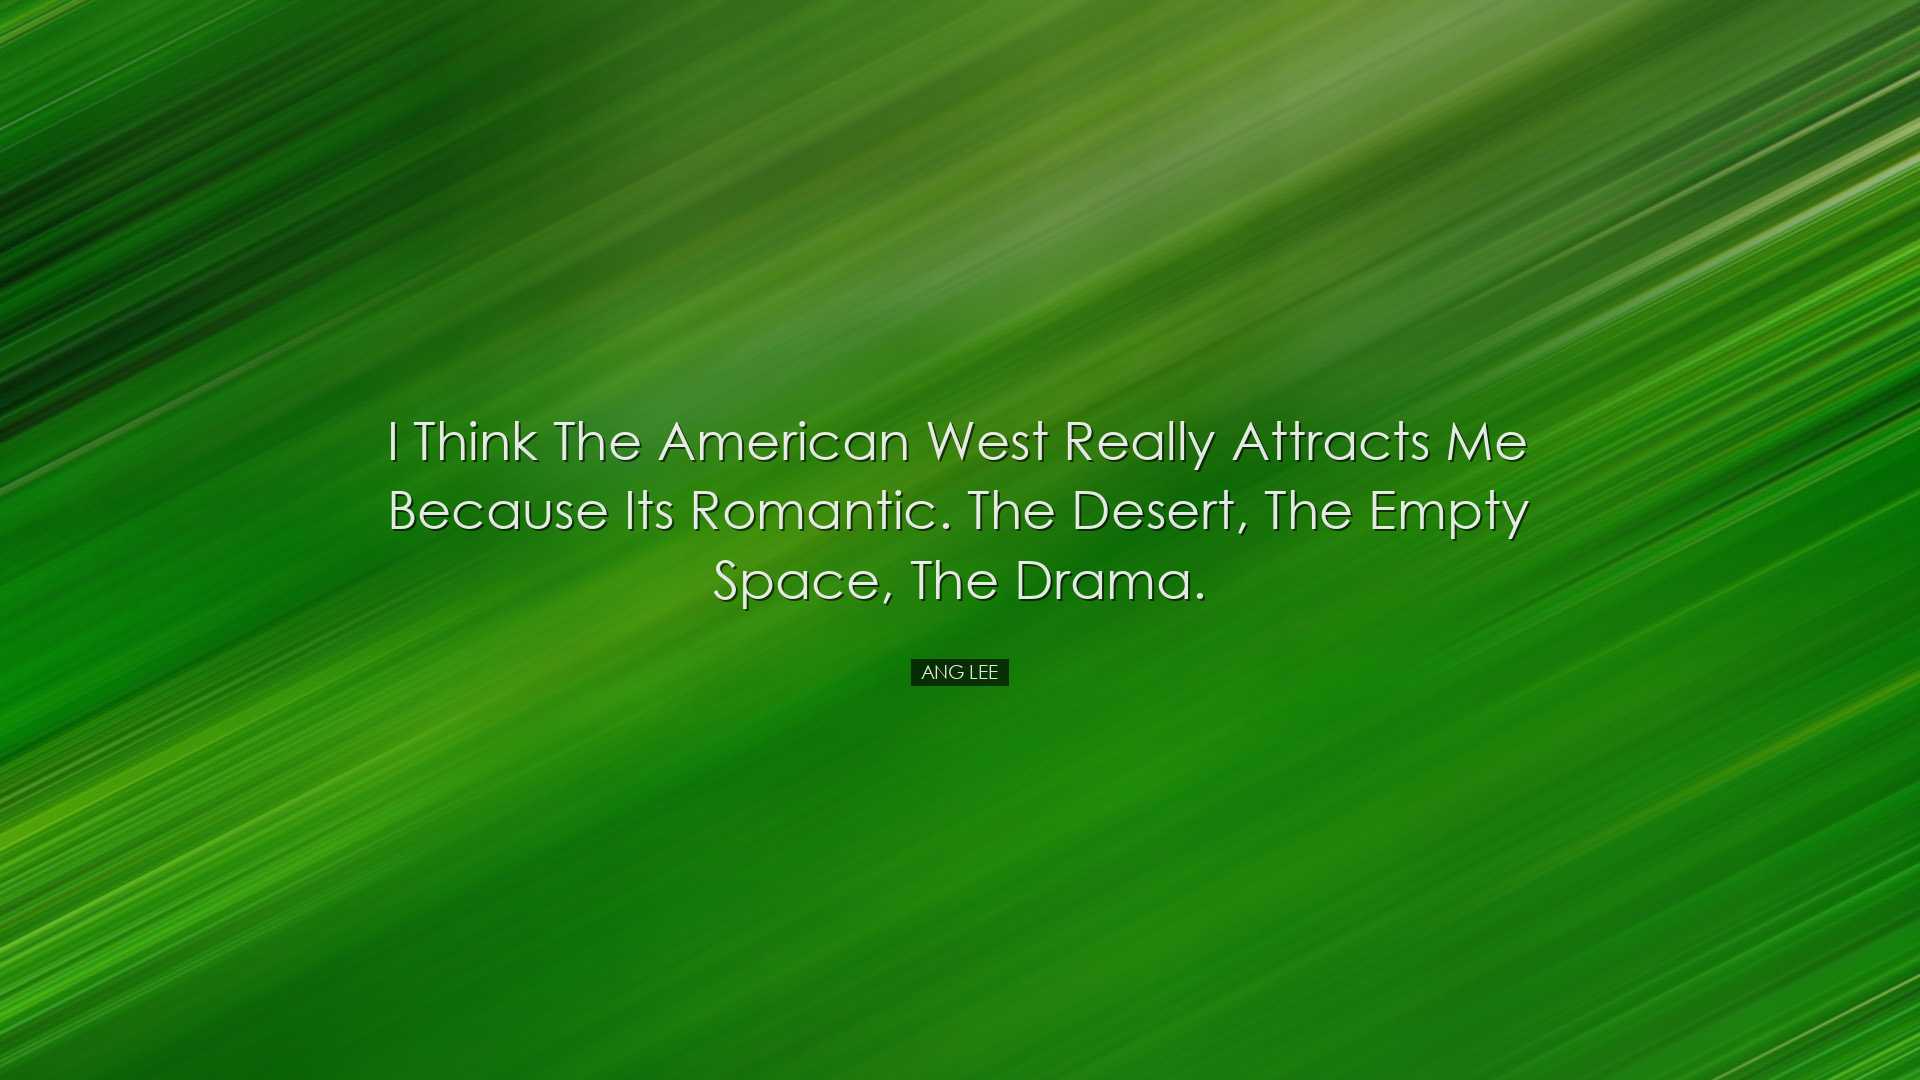 I think the American West really attracts me because its romantic.